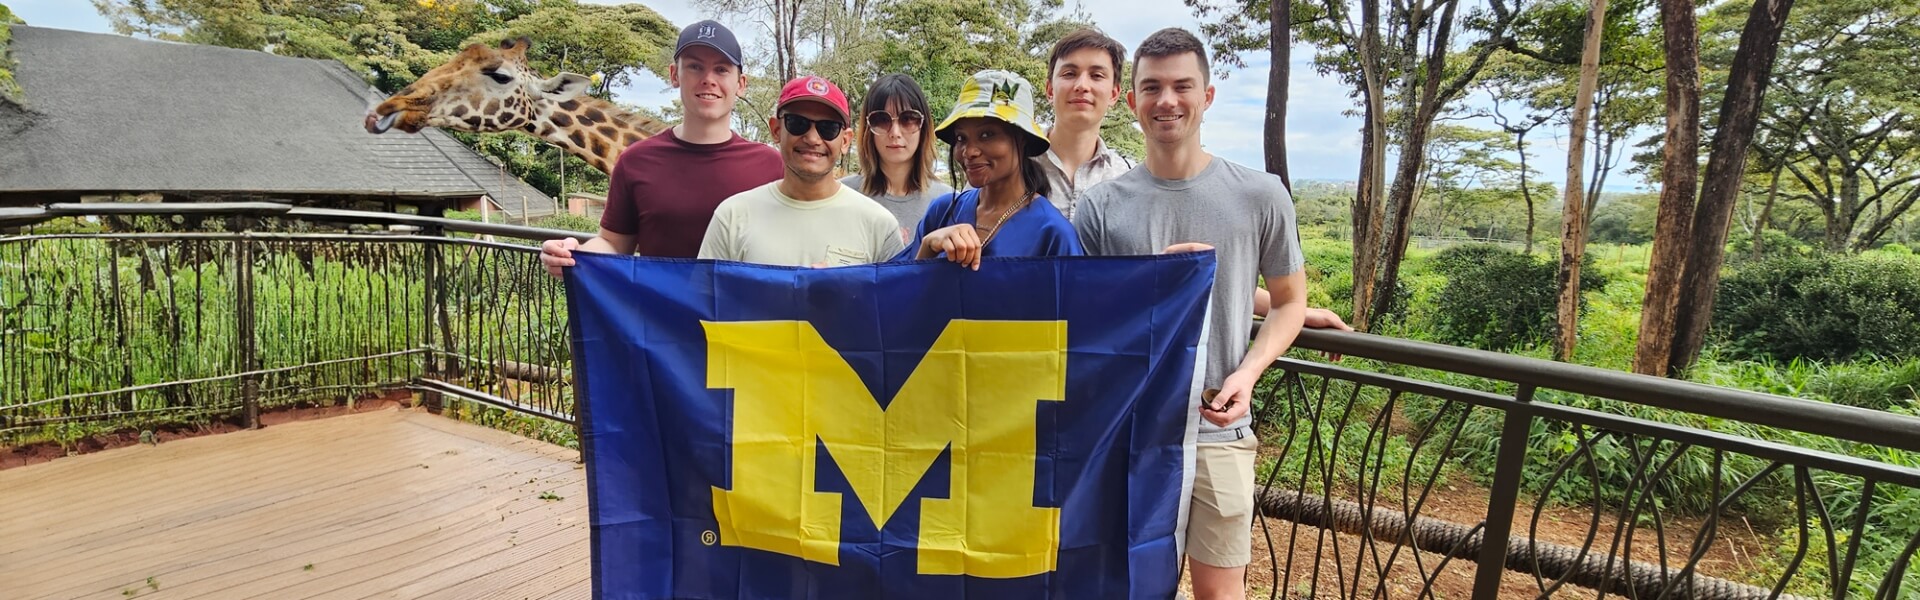 Michigan law students holding up a University of Michigan flag in South Africa, with a giraffe in the background grazing from a tree.